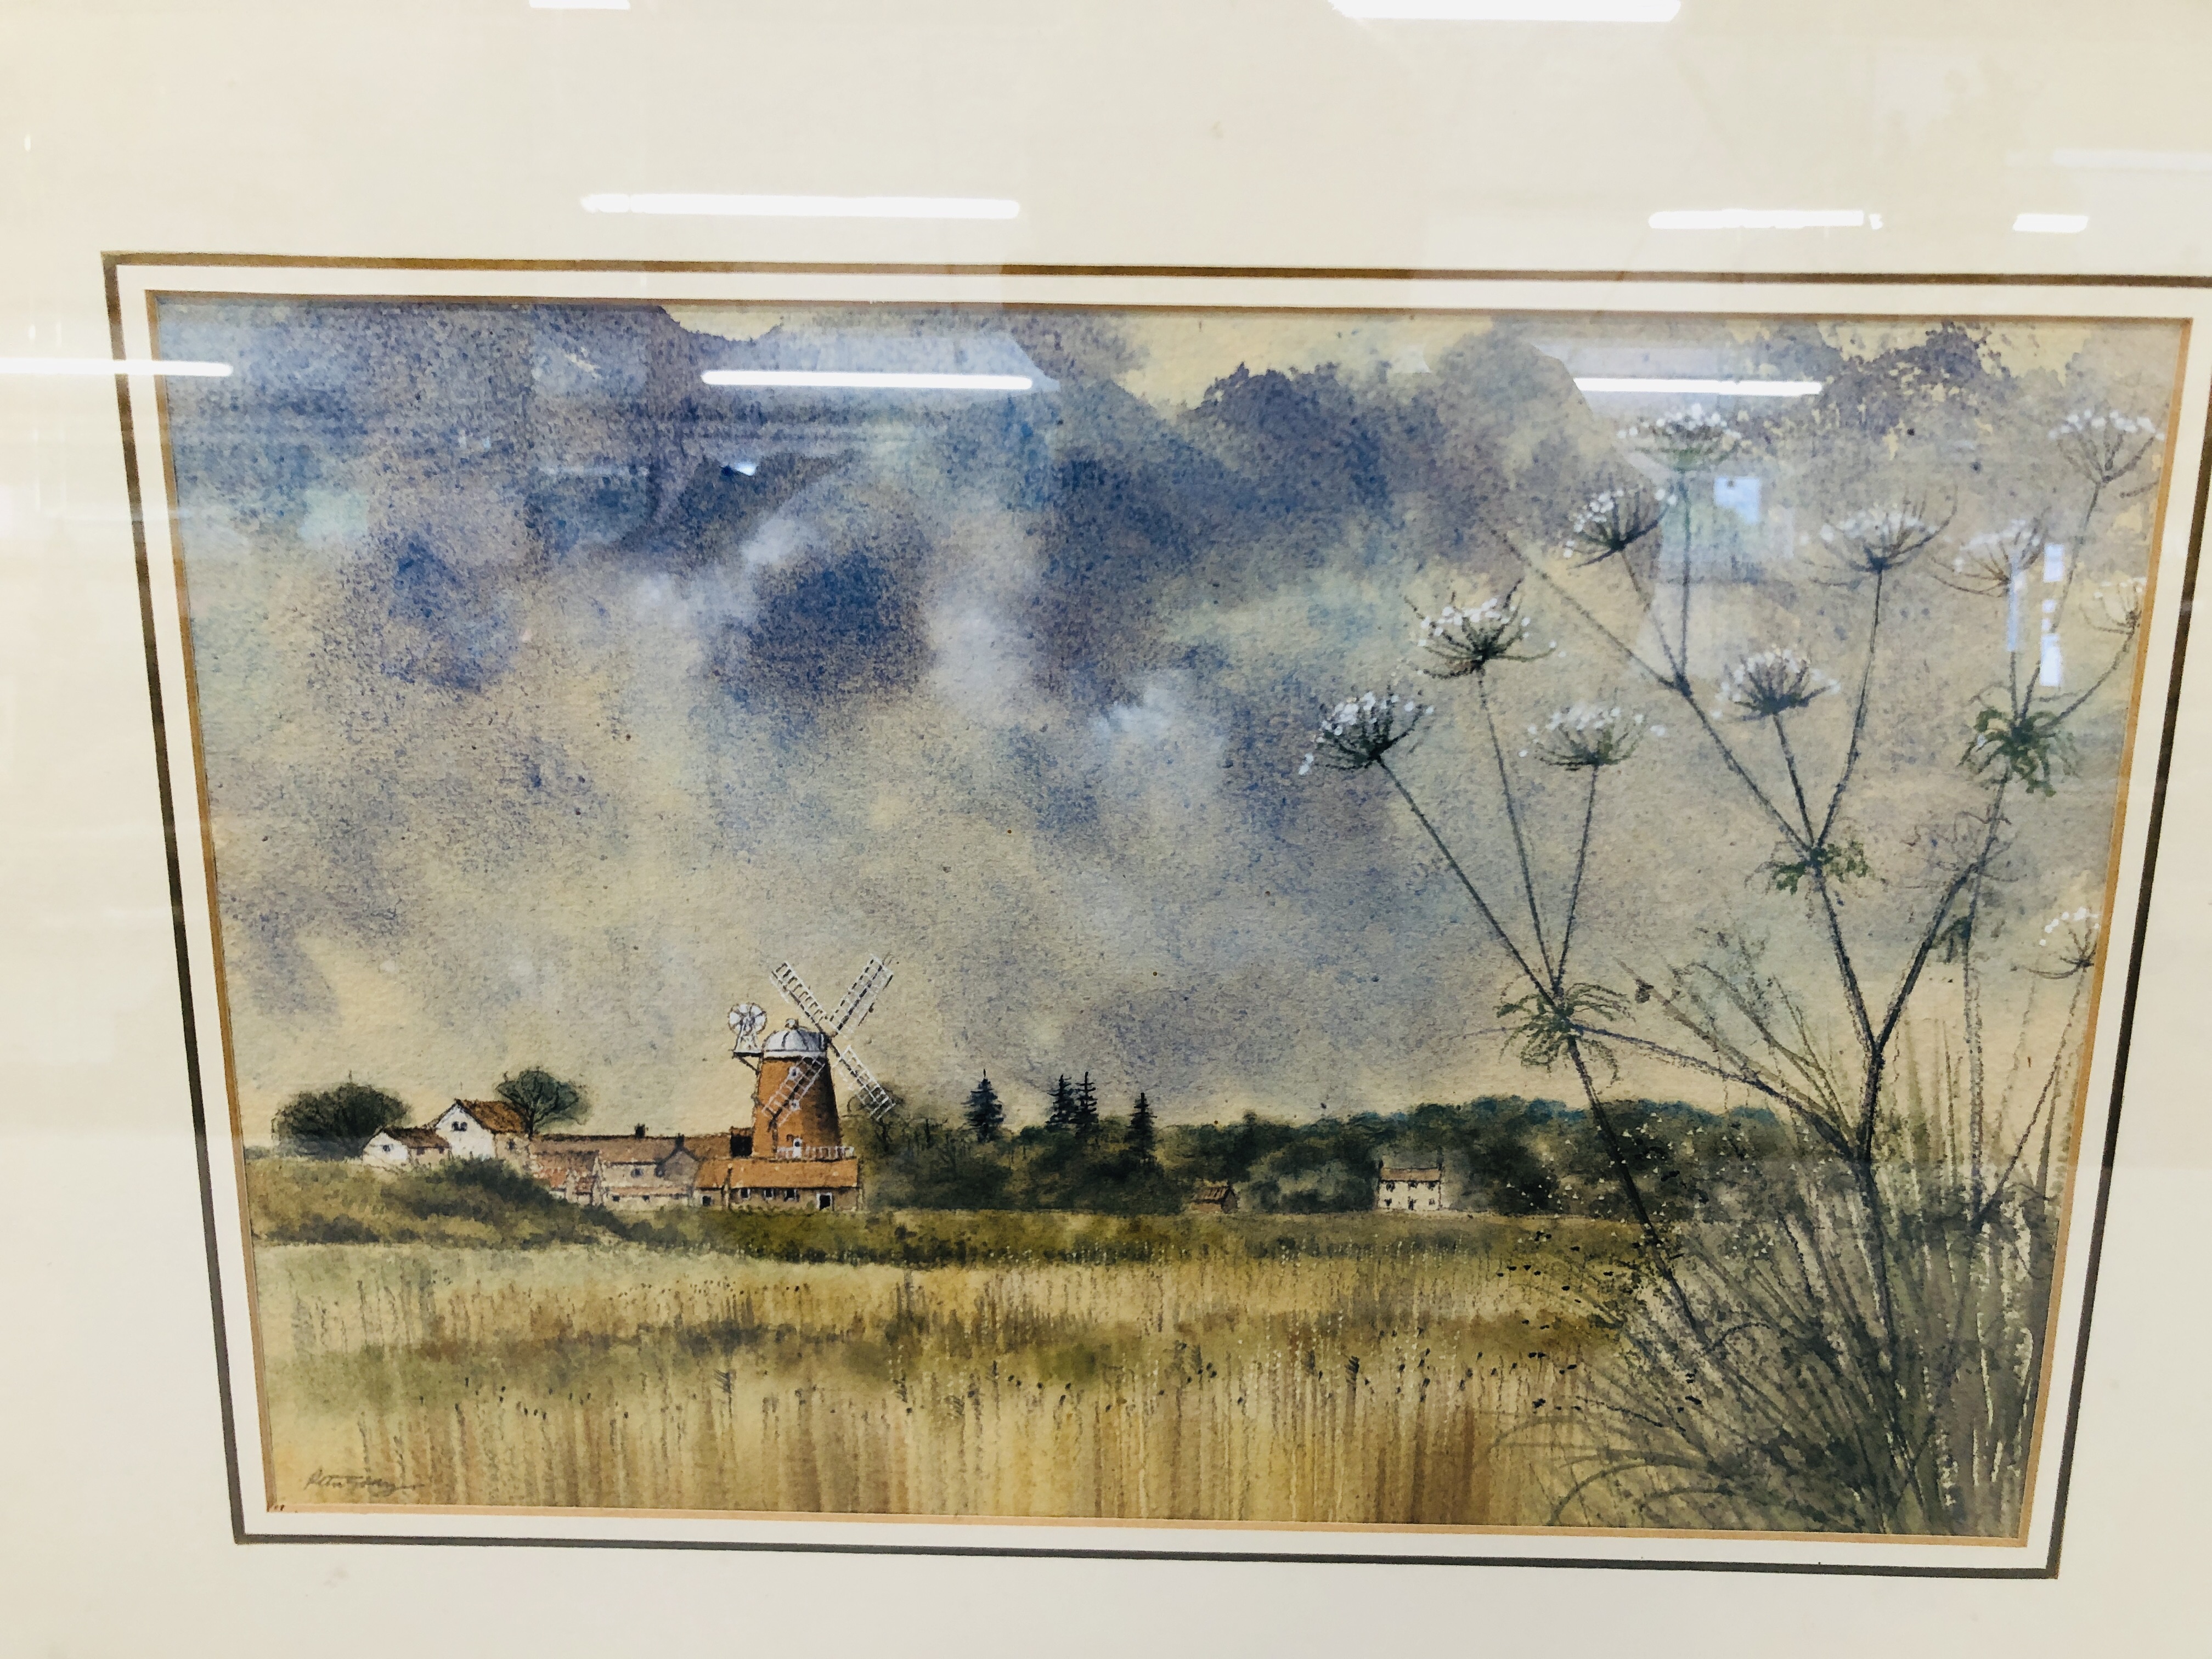 FRAMED WATERCOLOUR "CLEY MILL, JUNE" BEARING SIGNATURE PETER SOLLY WIDTH 35CM. HEIGHT 23.5CM. - Image 2 of 9